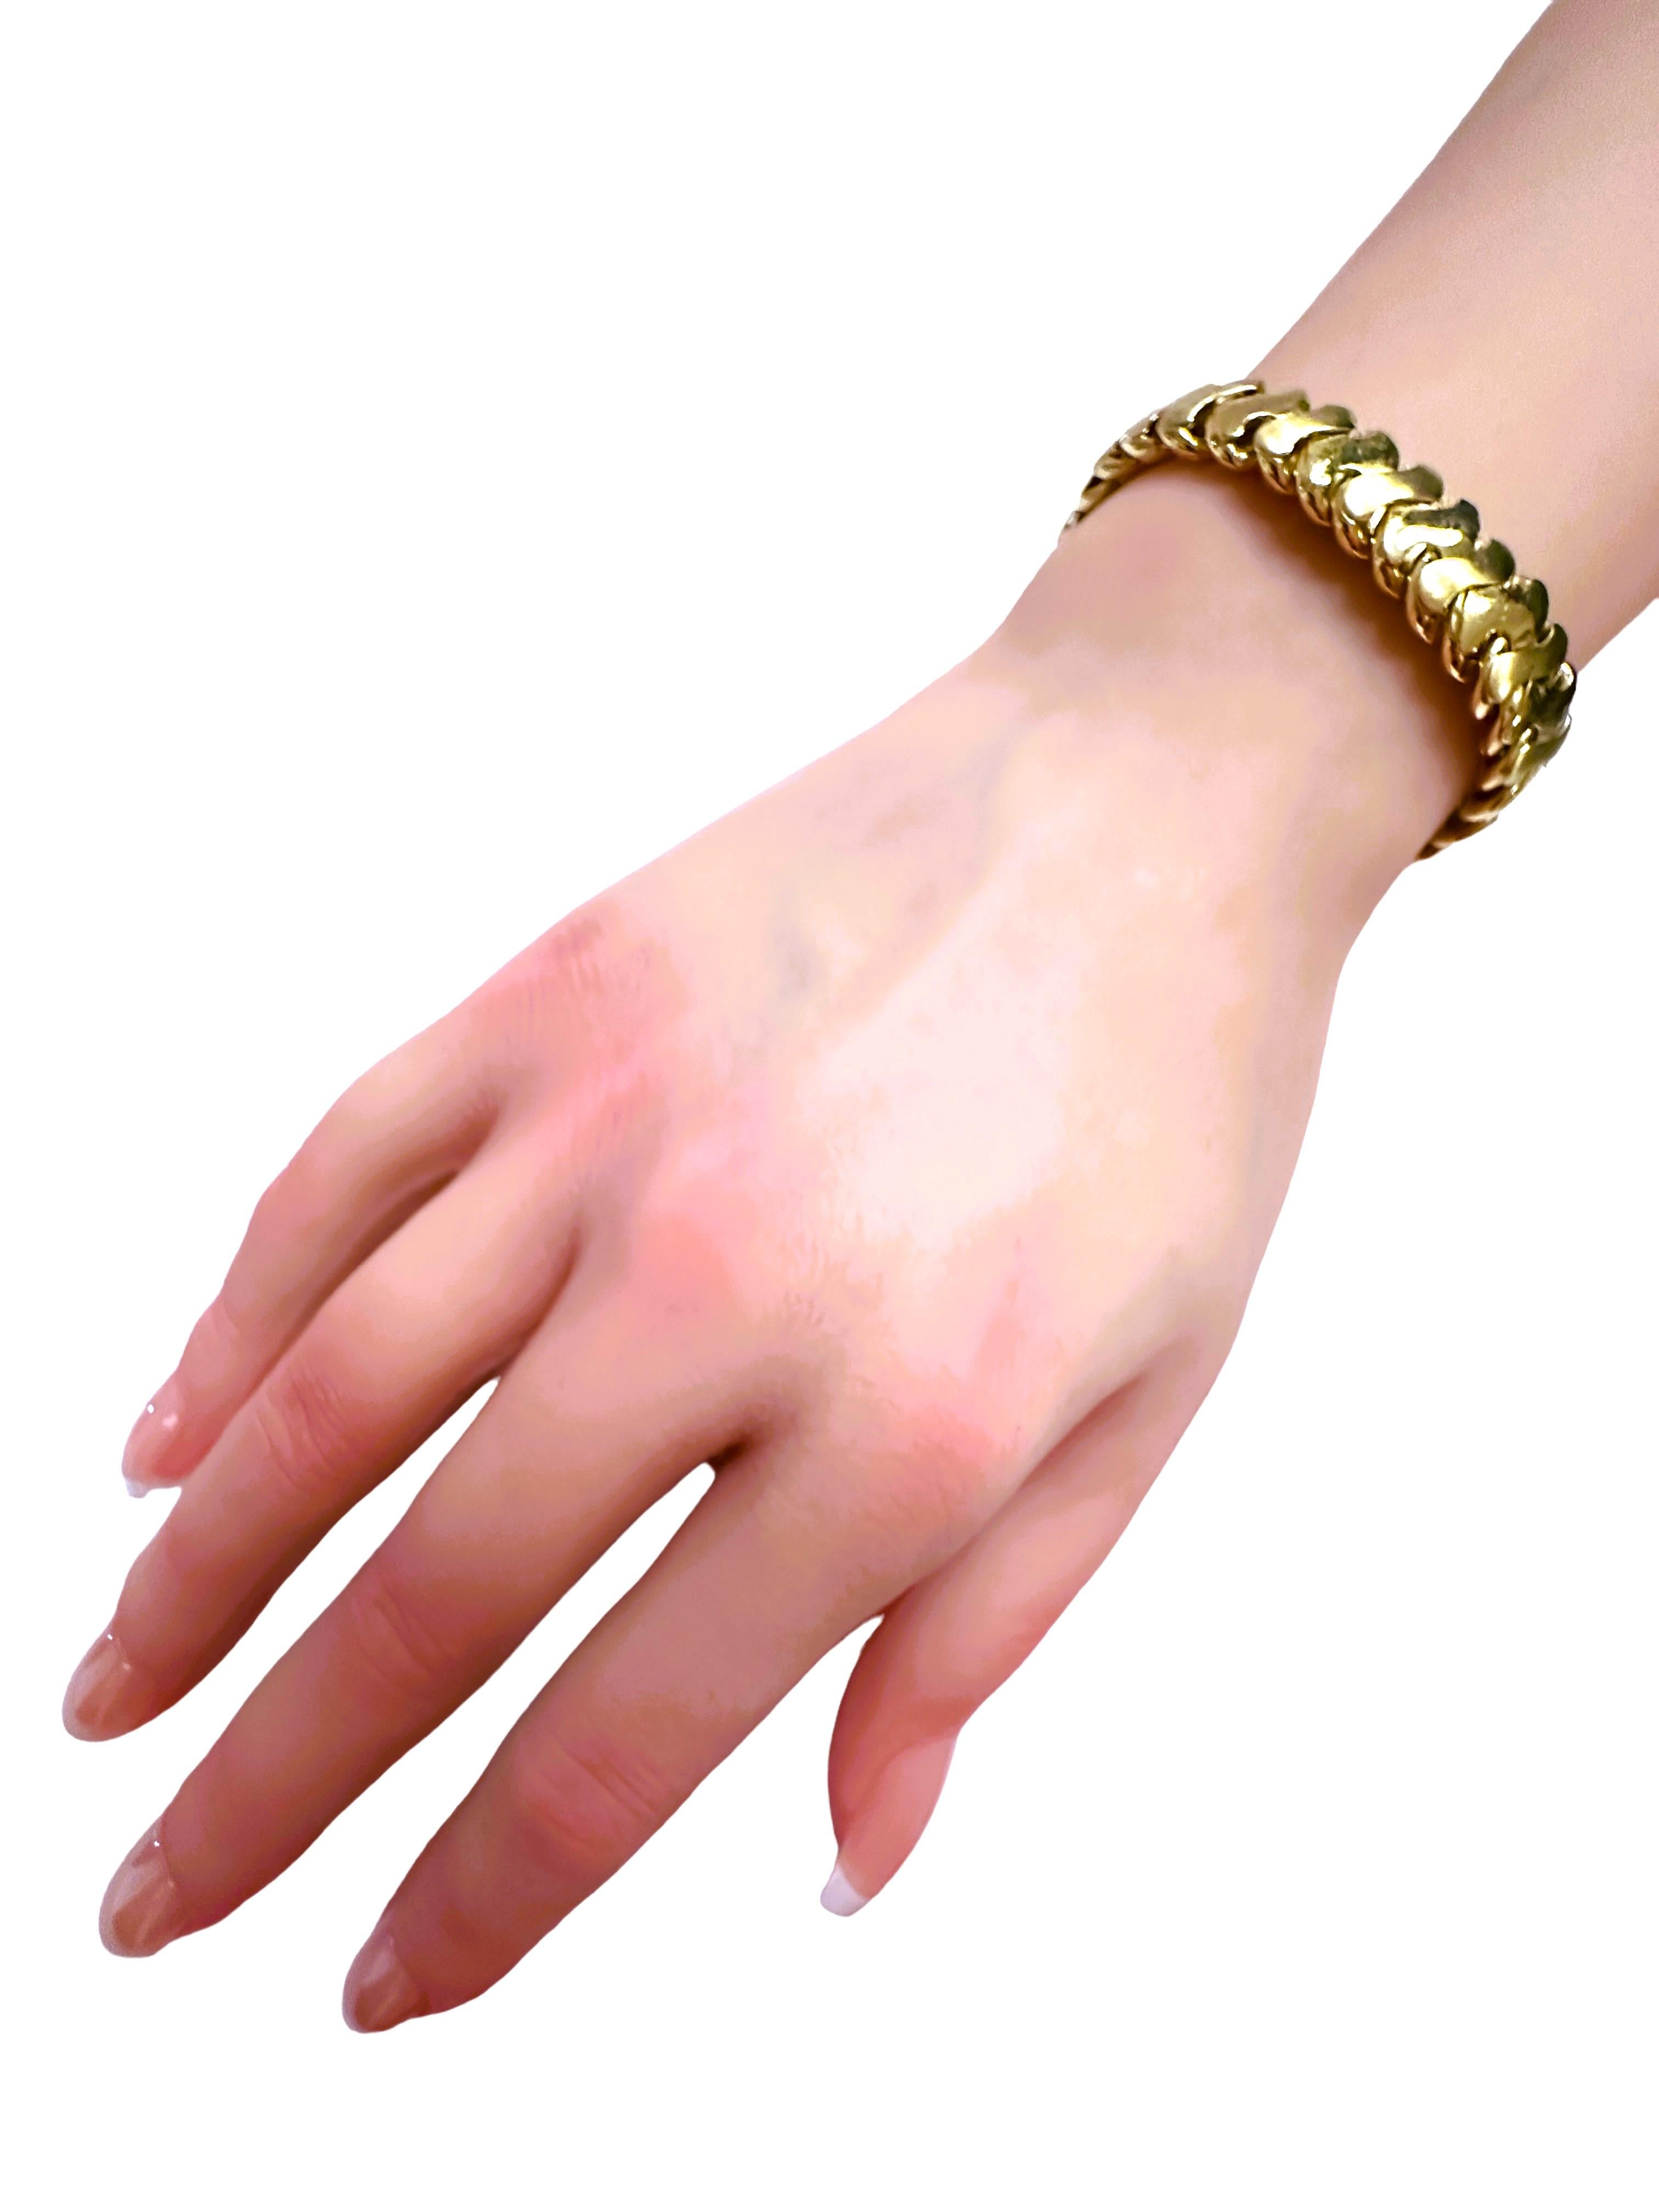 18k Yellow Gold High Polish Two-Sided Italian Bracelet 7.5 Inches 38.78 Grams 3